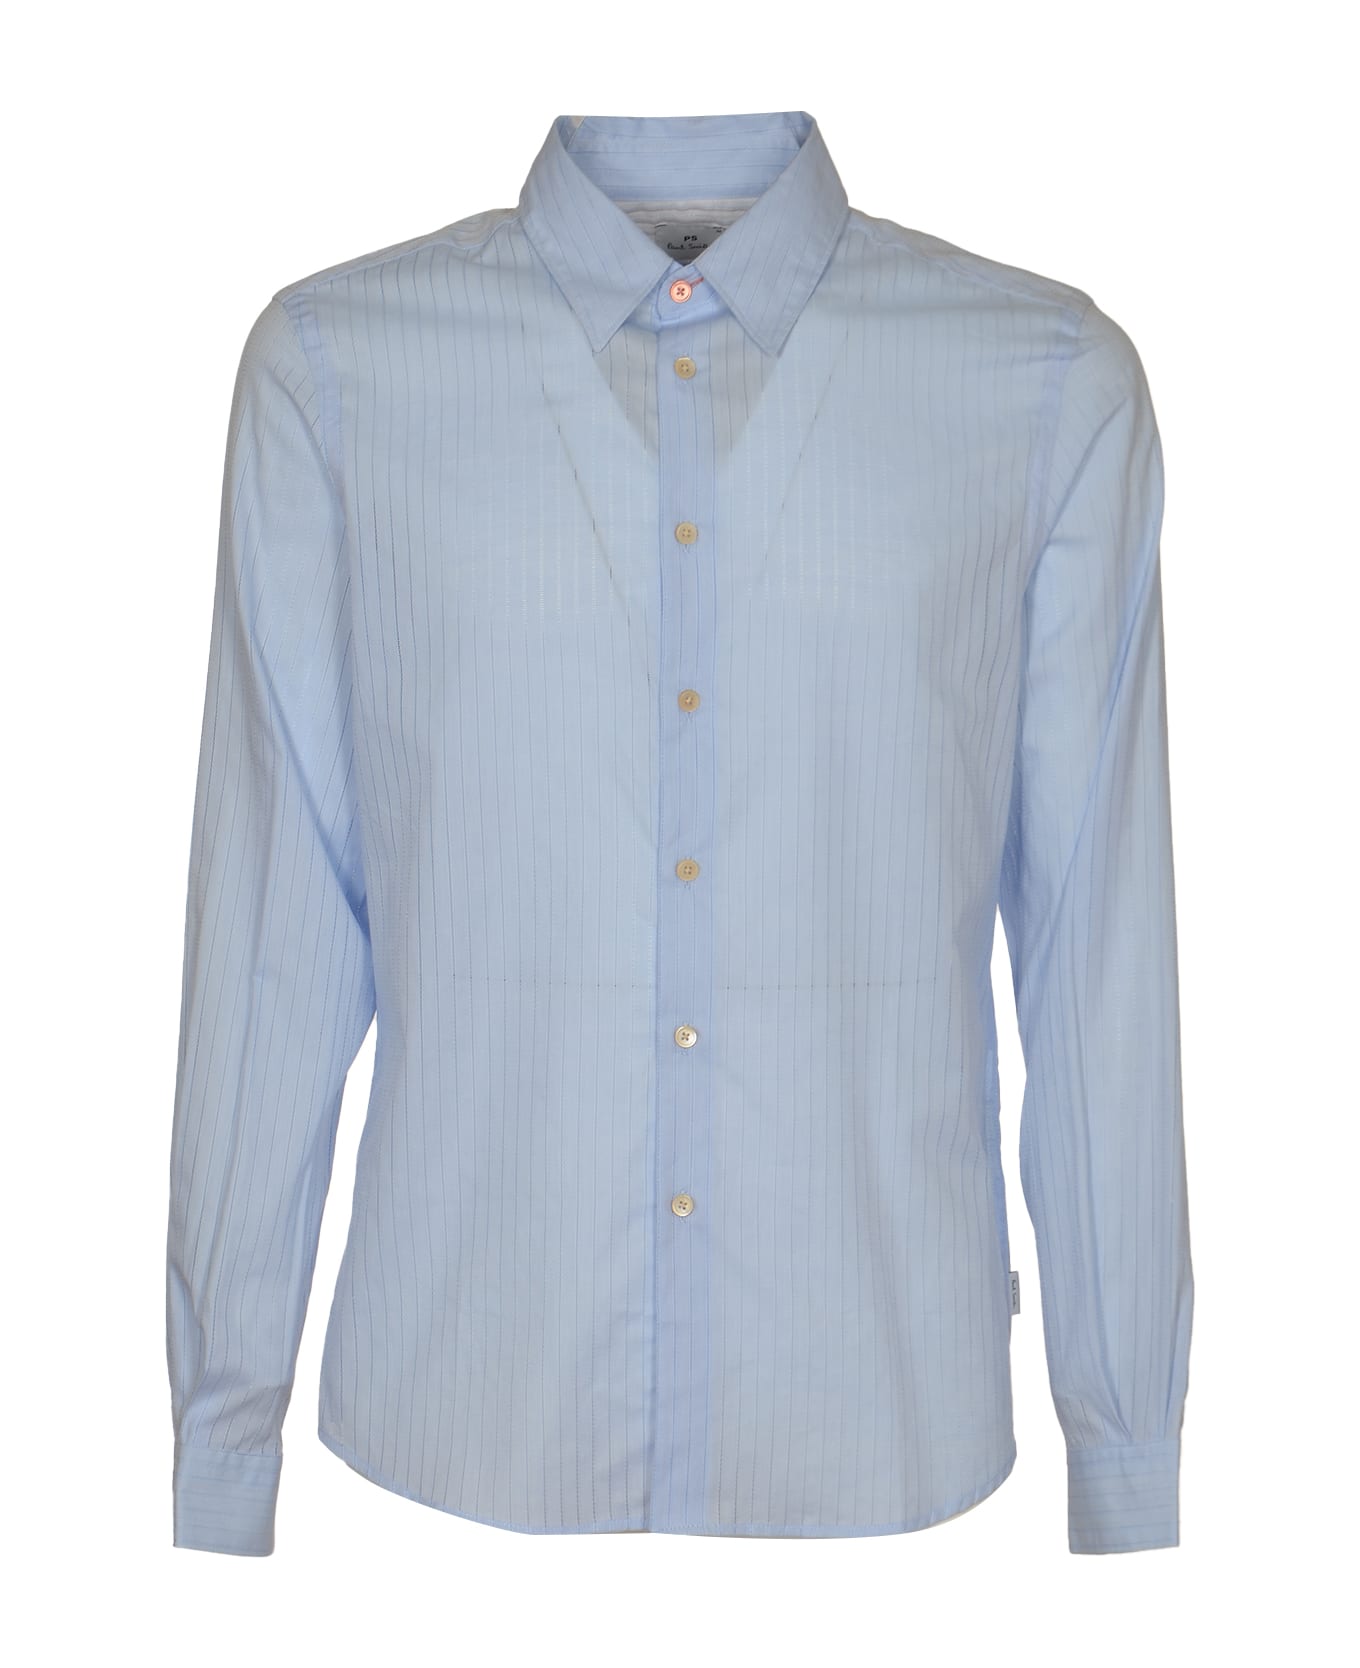 Paul Smith Mens Ls Tailored Fit Shirt - Blues